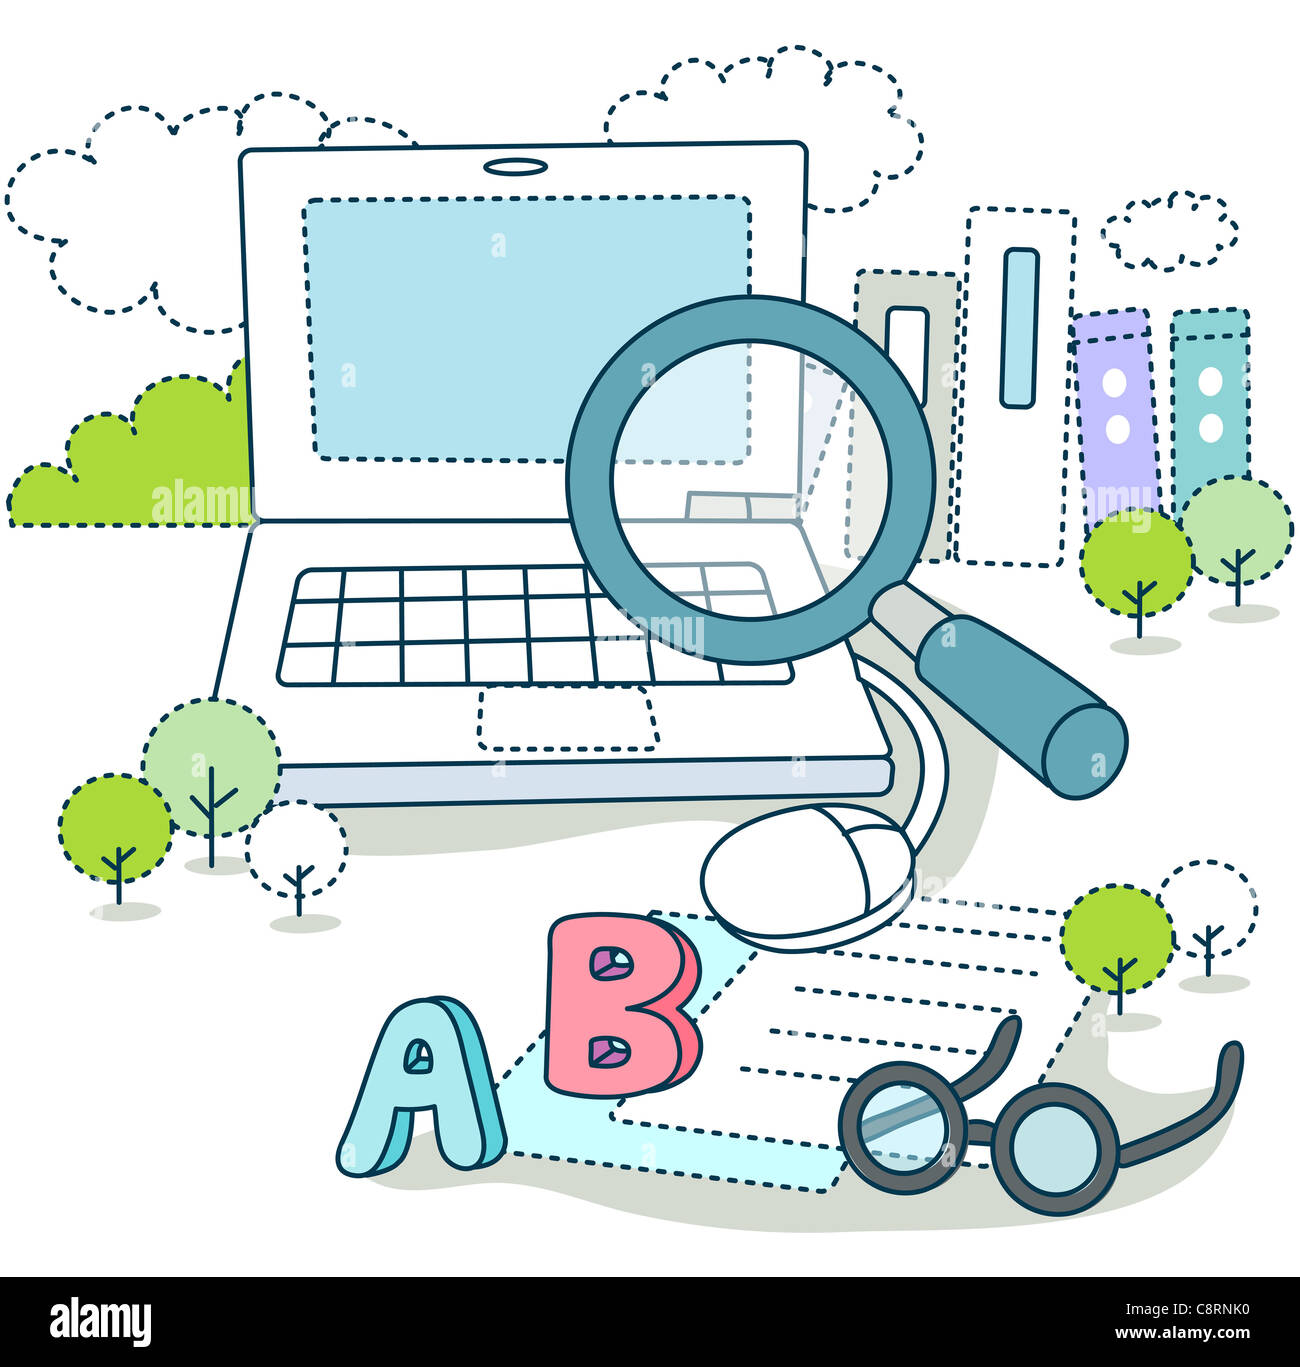 Illustration of education on laptop with magnifying glass Stock Photo